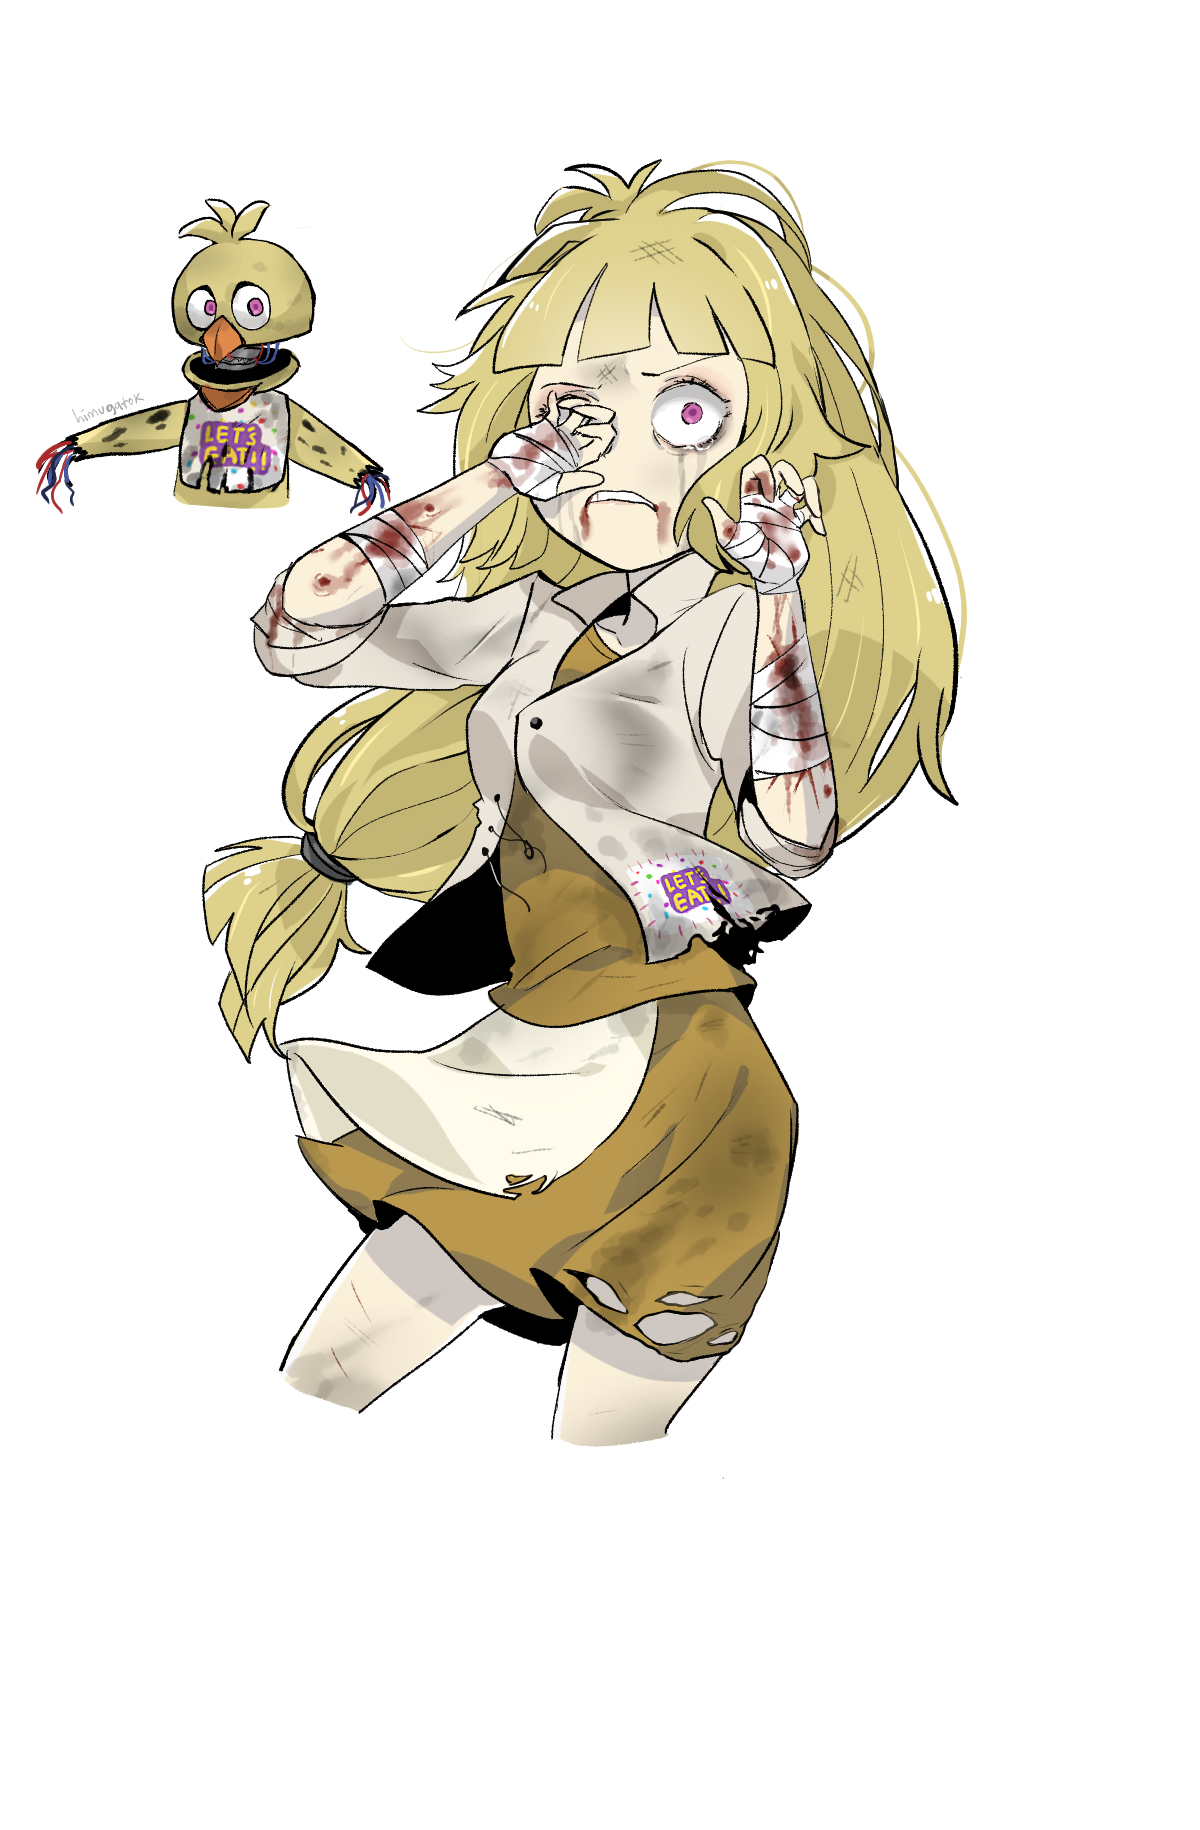 Withered Chica  Anime fnaf, Fnaf characters, Fnaf drawings